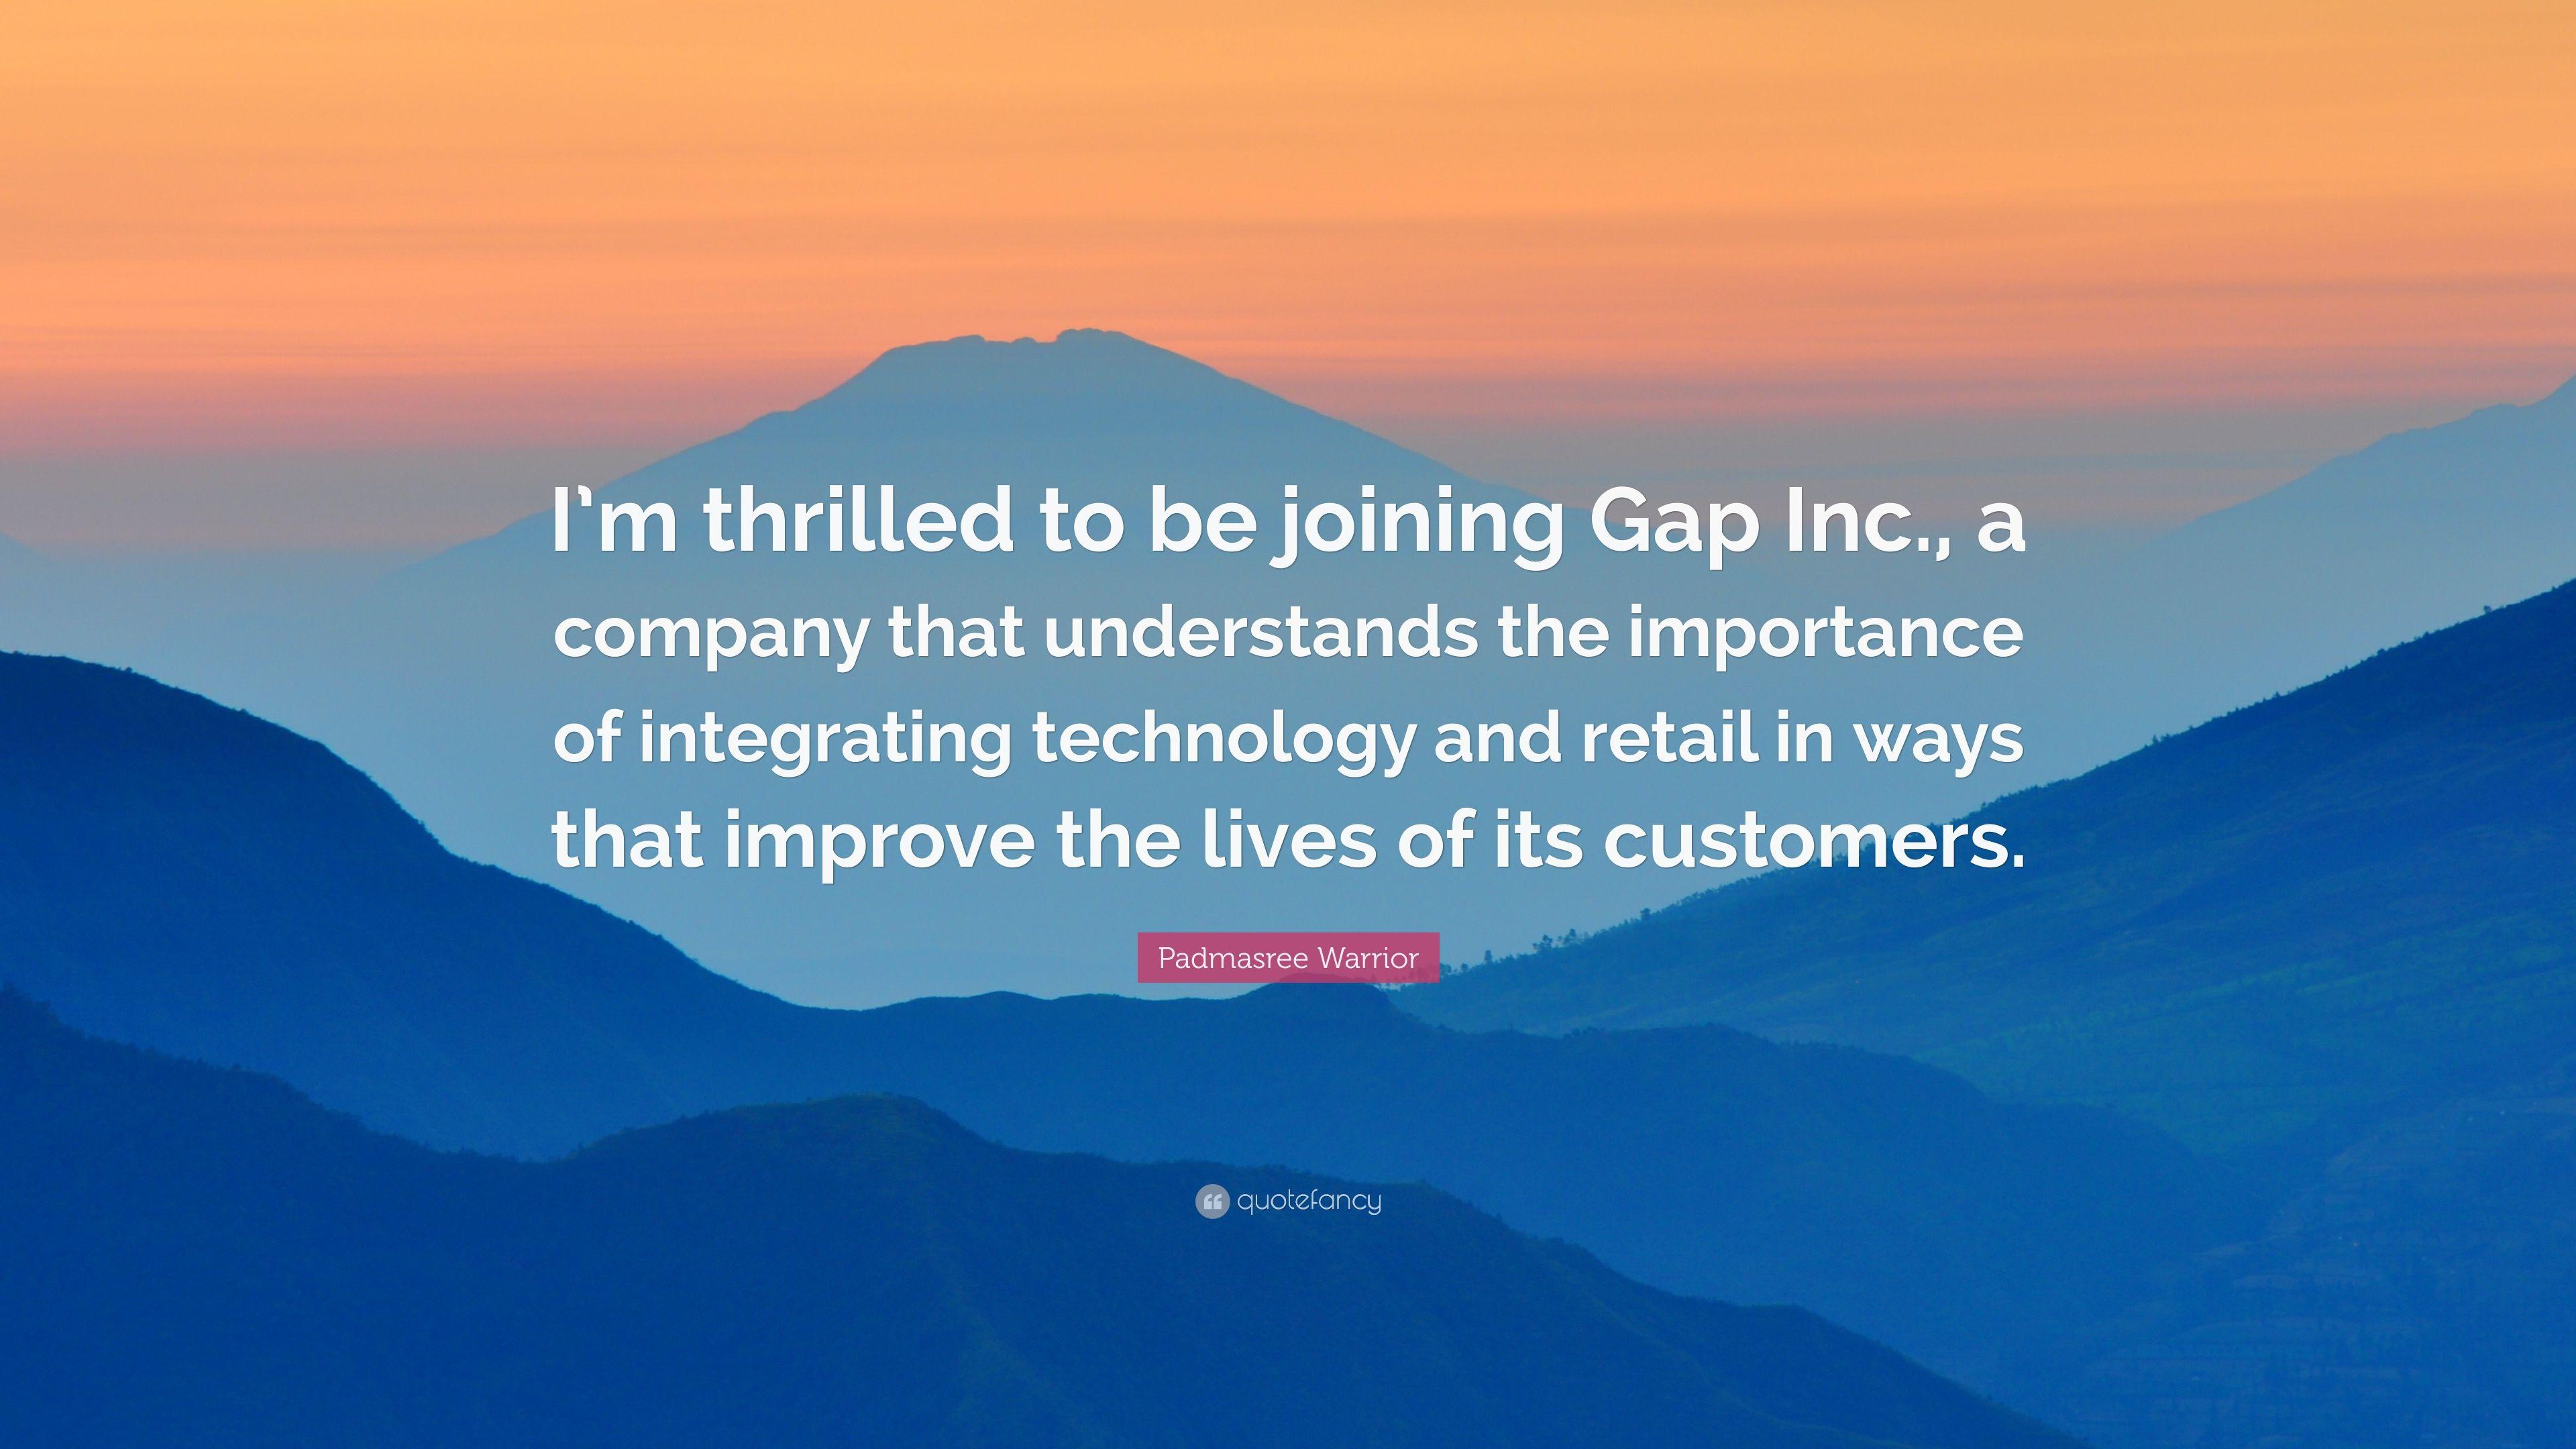 Padmasree Warrior Quote: “I'm thrilled to be joining Gap Inc., a